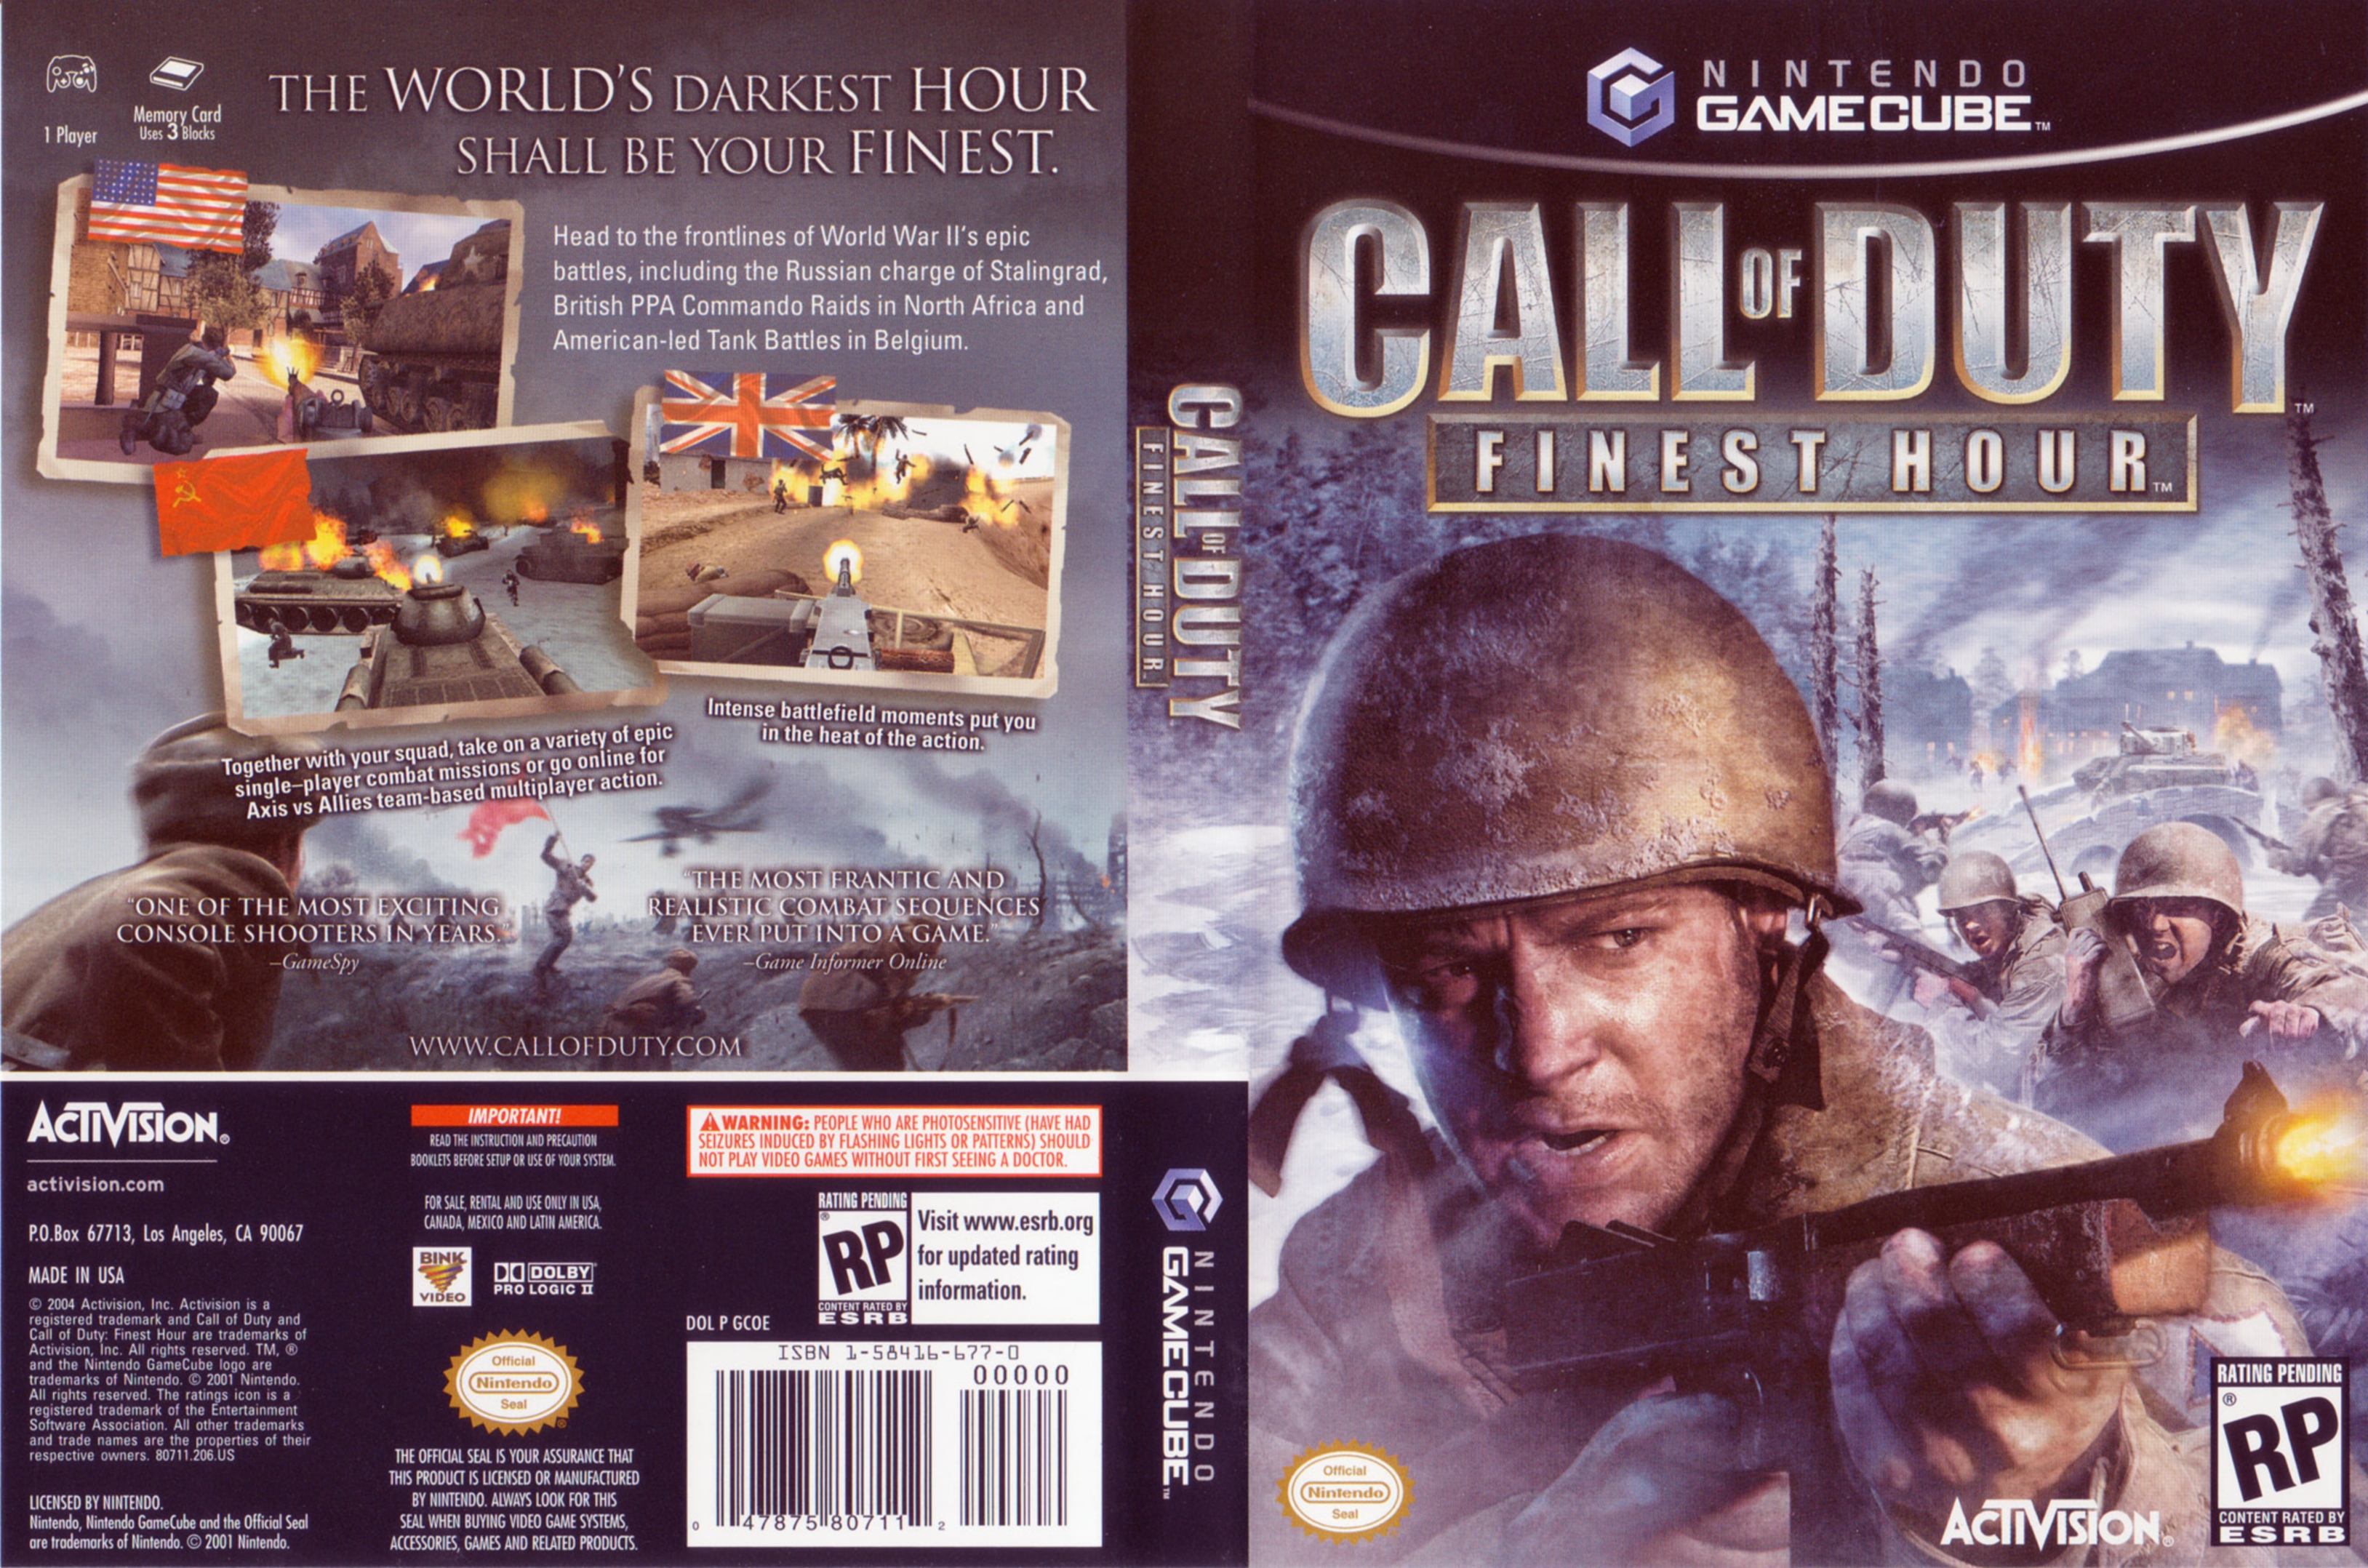 Call Of Duty Finest Hour Gamecube Covers Cover Century Over 500 000 Album Art Covers For Free